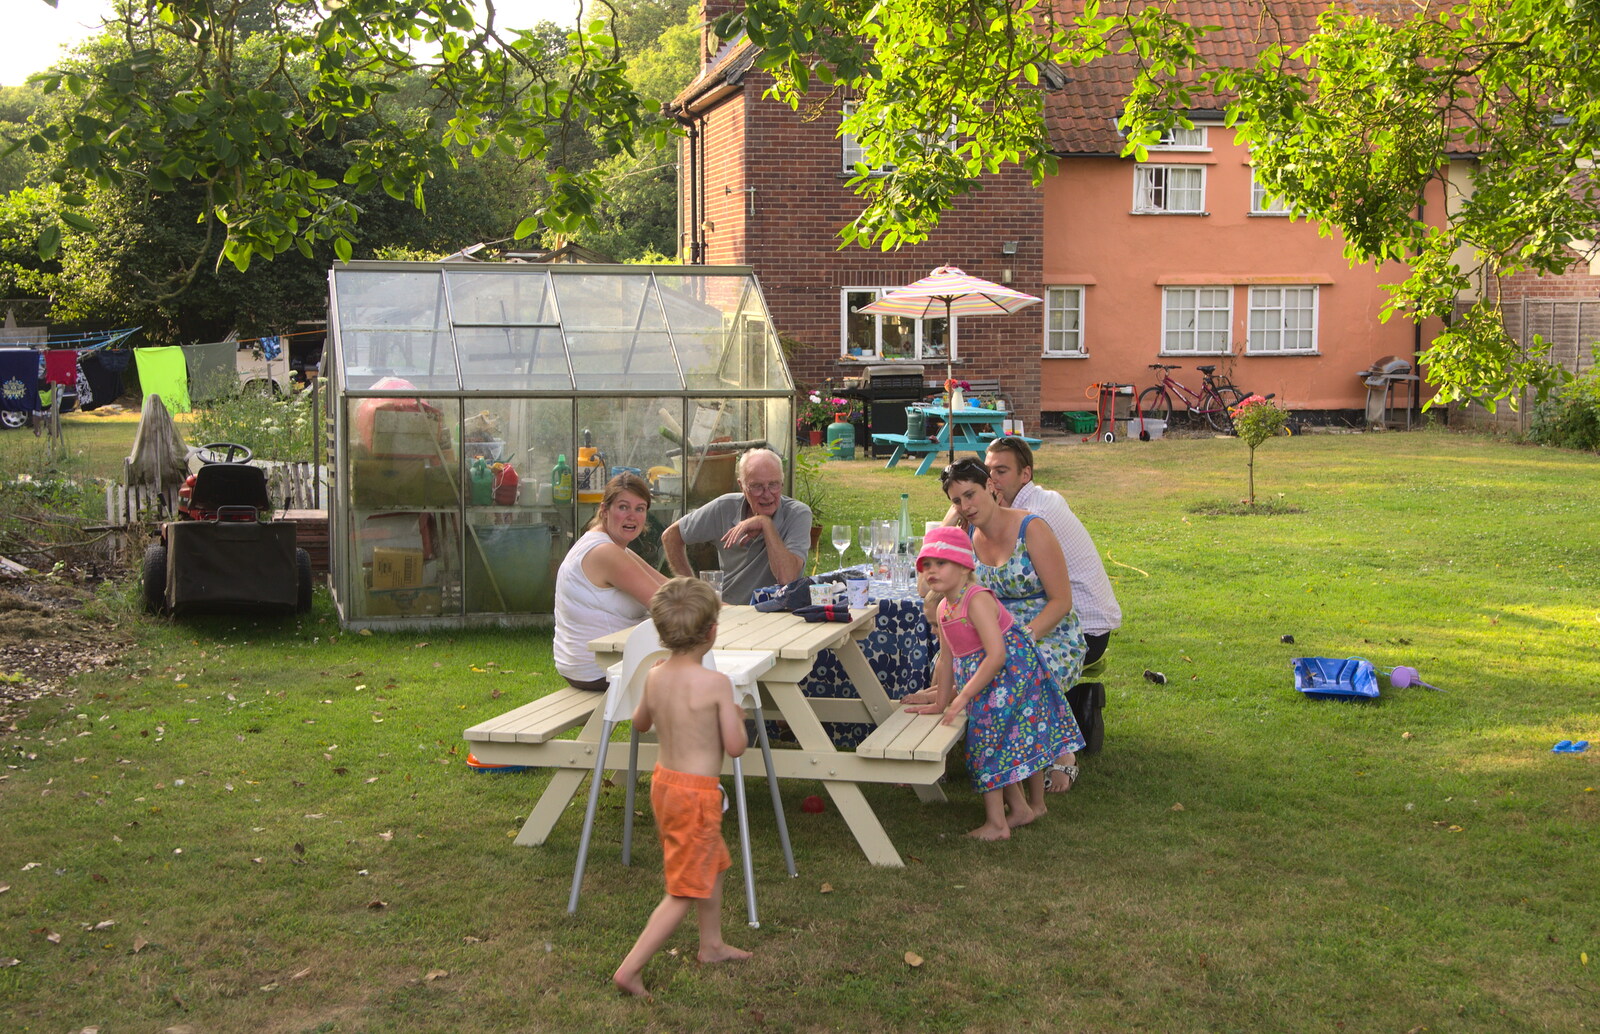 A garden barbeque gathering from An Interview with Rick Wakeman and Other Stories, Diss, Norfolk - 22nd July 2013